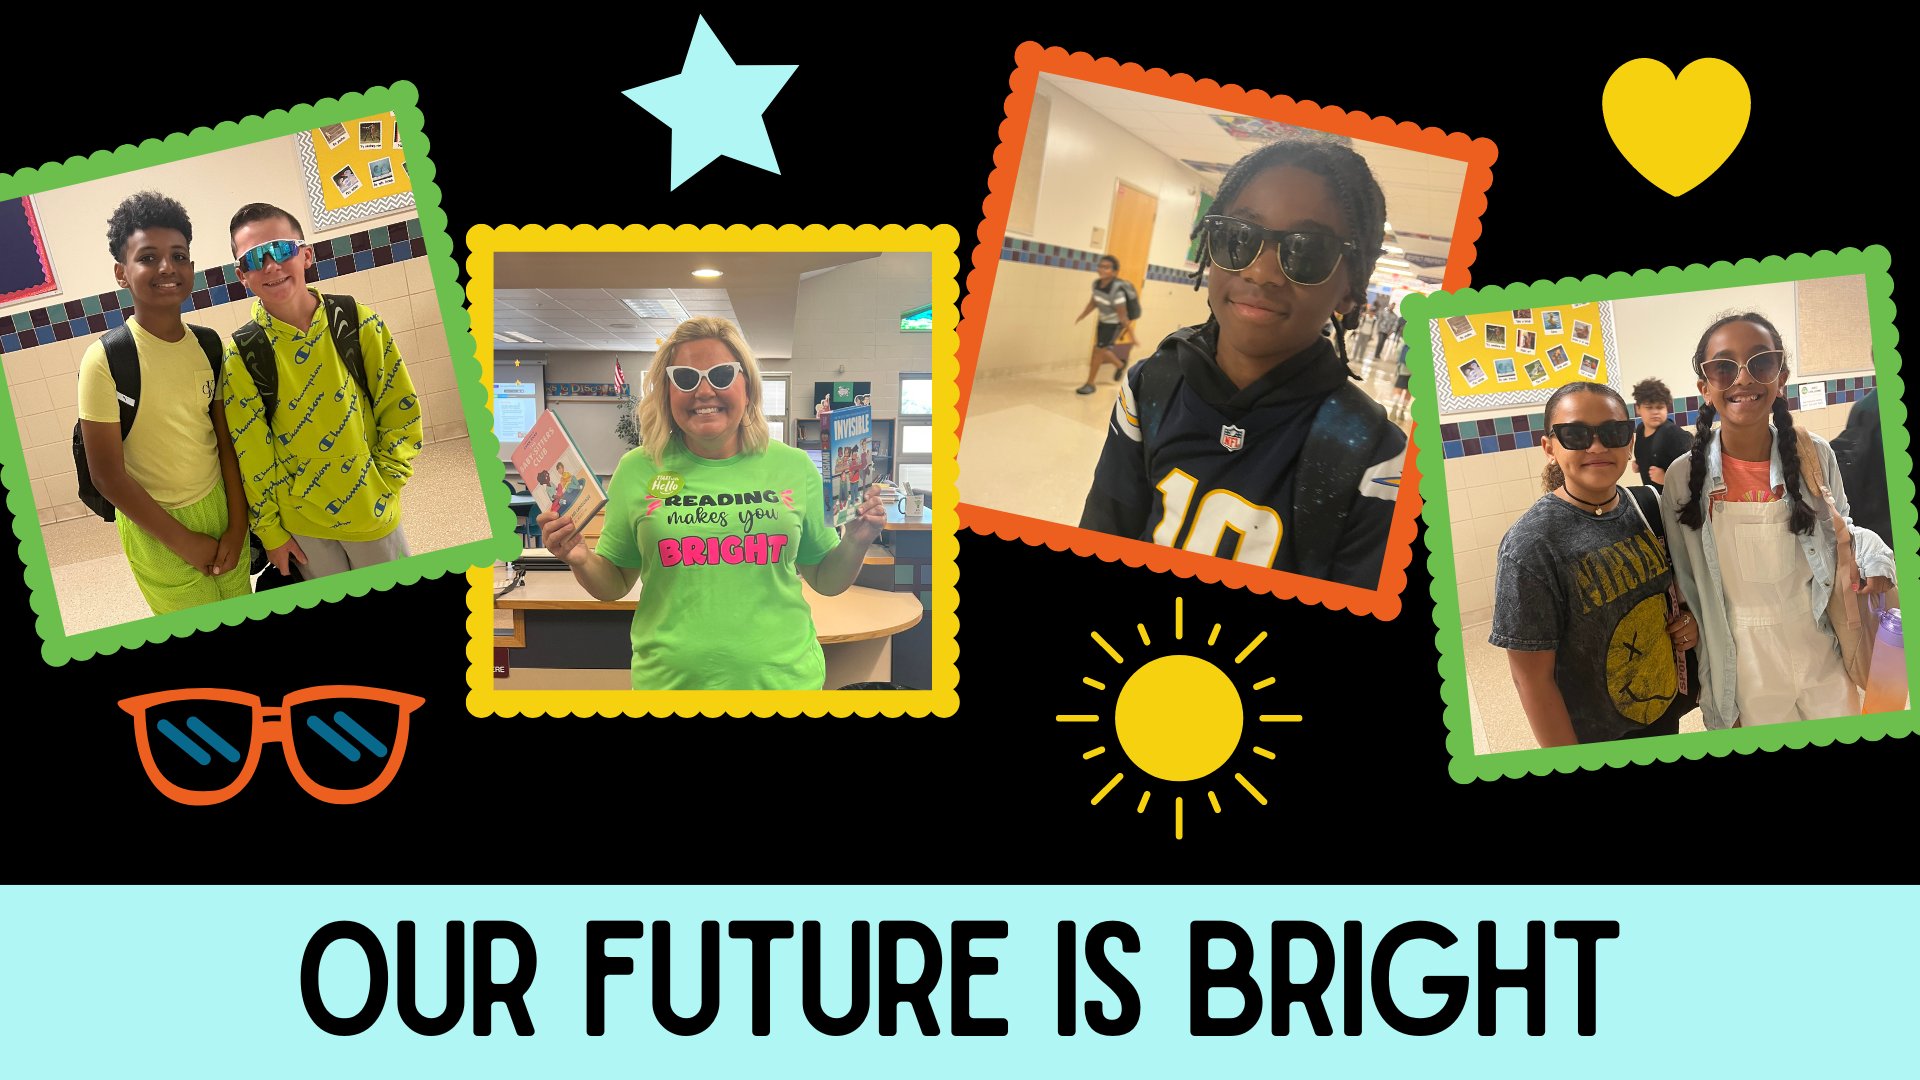 Our Future is Bright! poster featuring snapshots of students wearing sunglasses